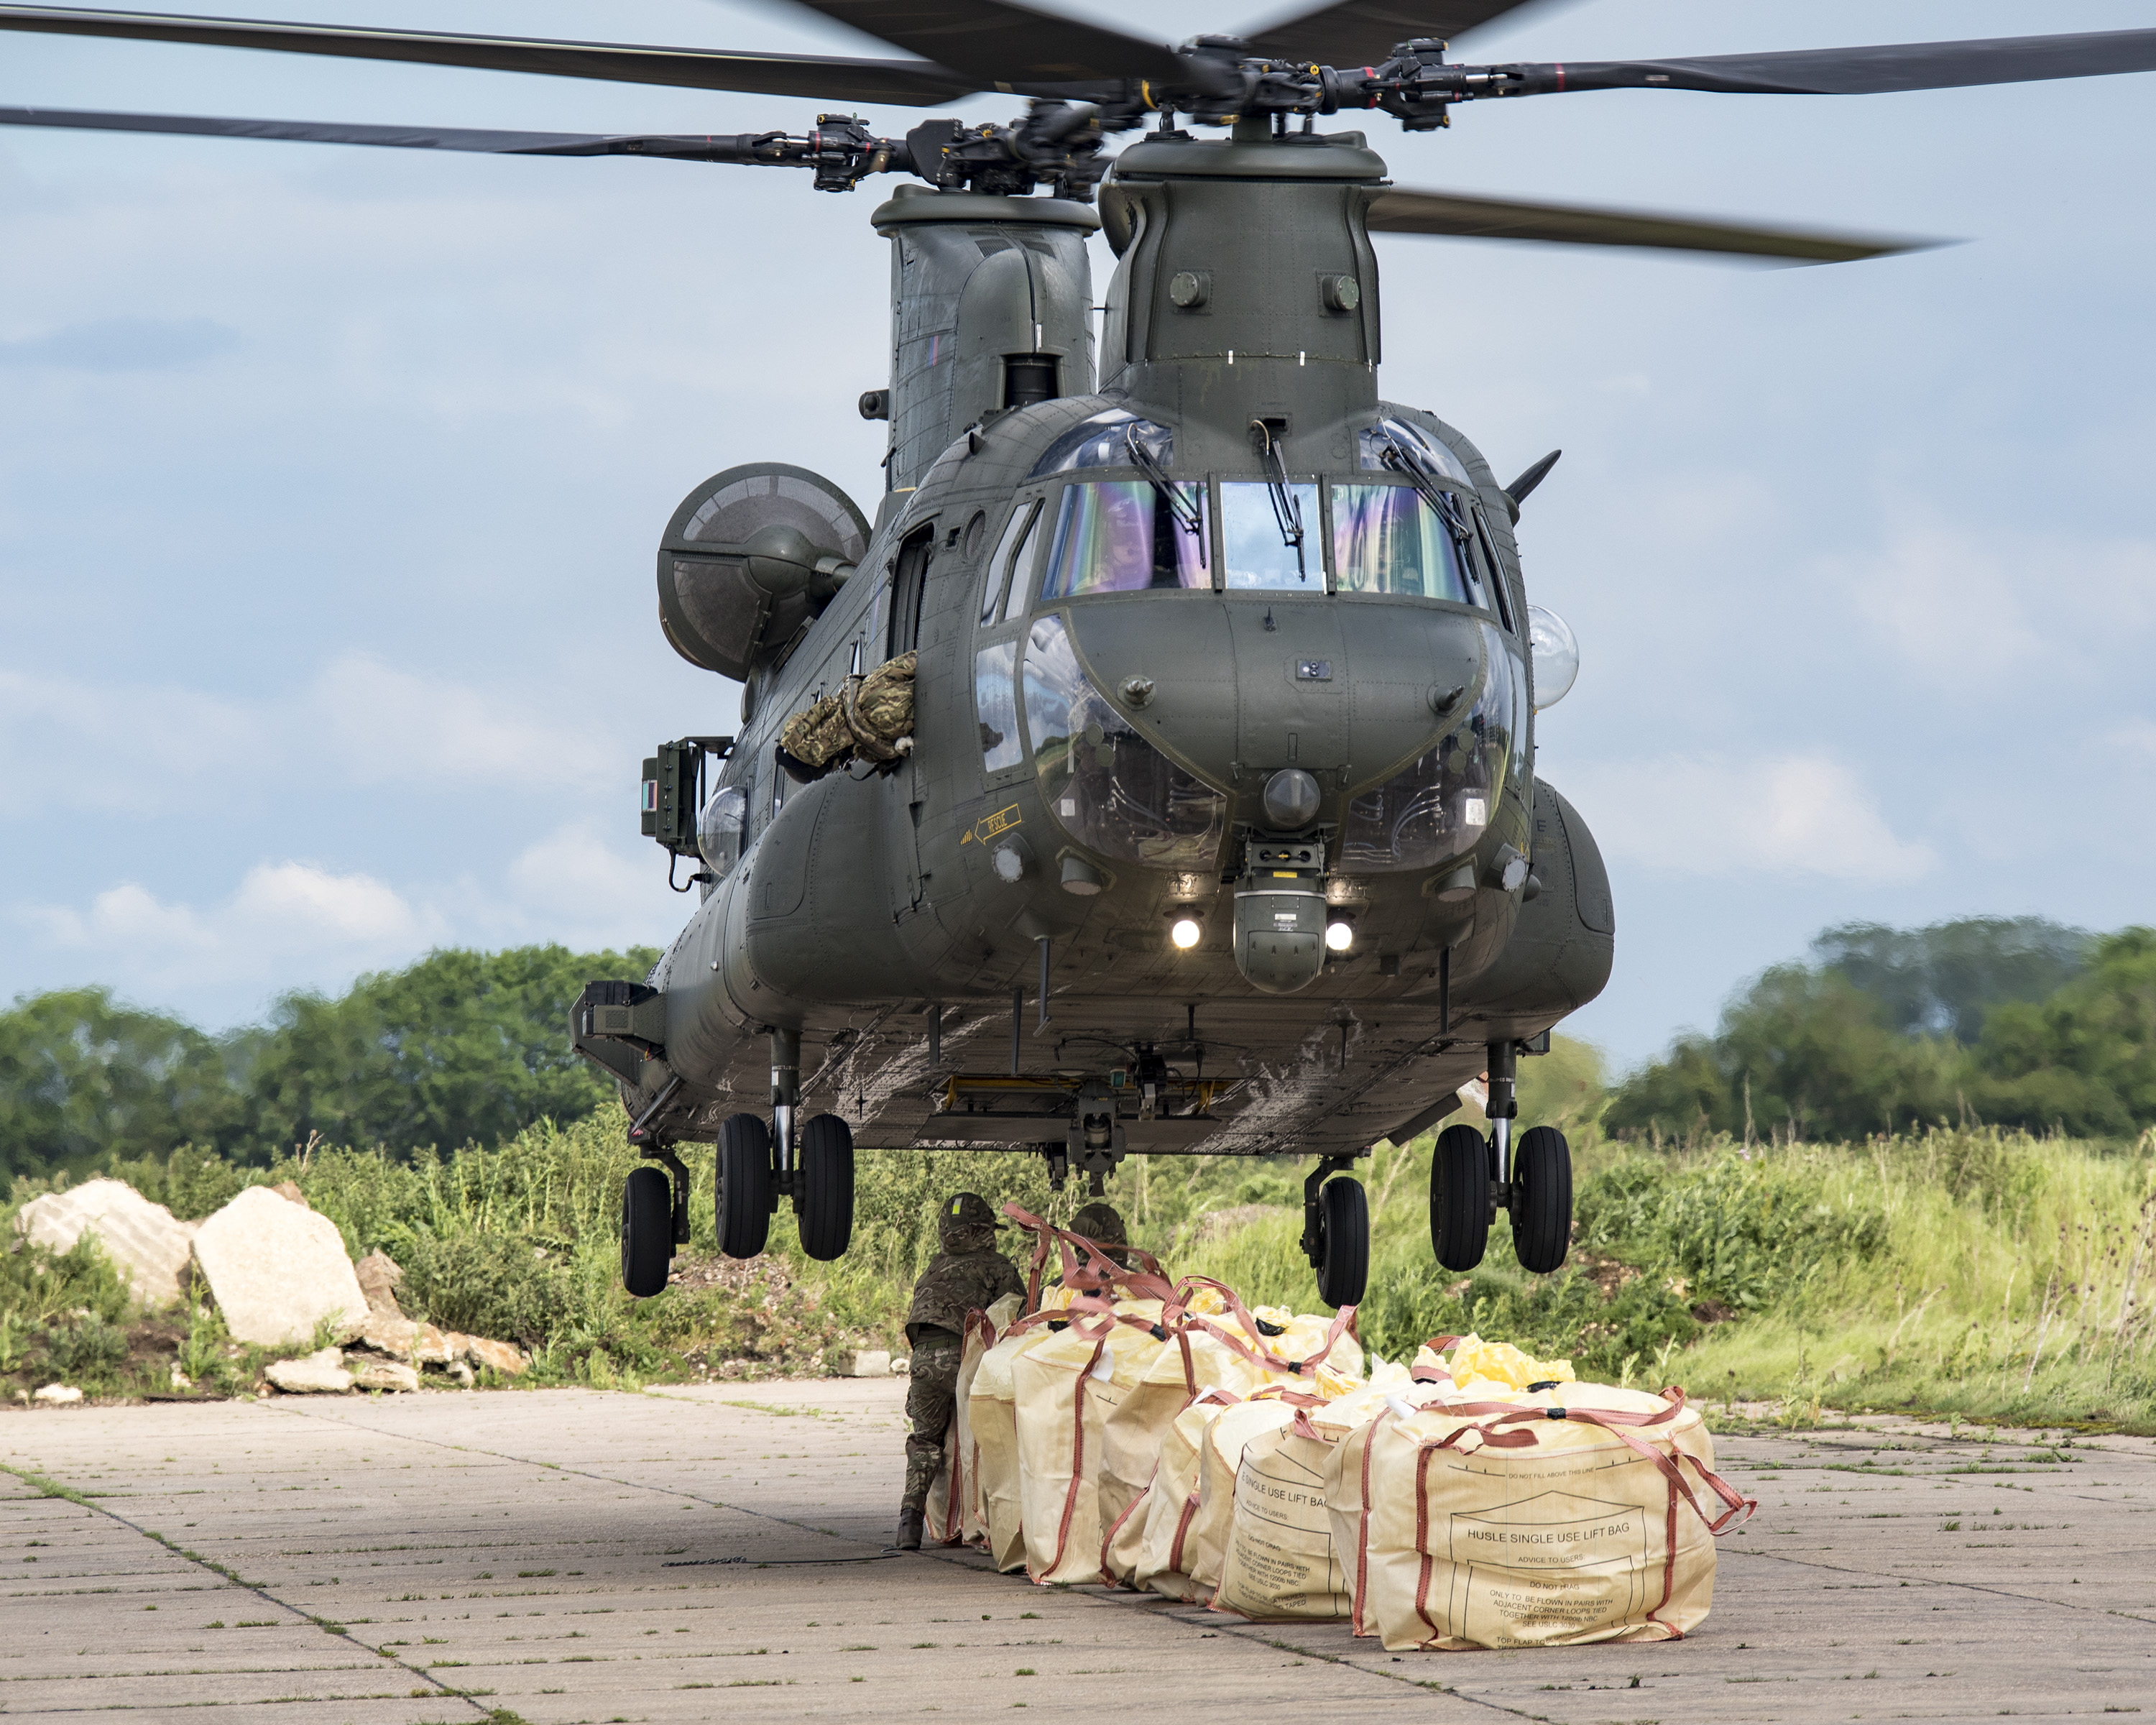 Image shows aviators tending to cargo load underneath hovering helicopter.